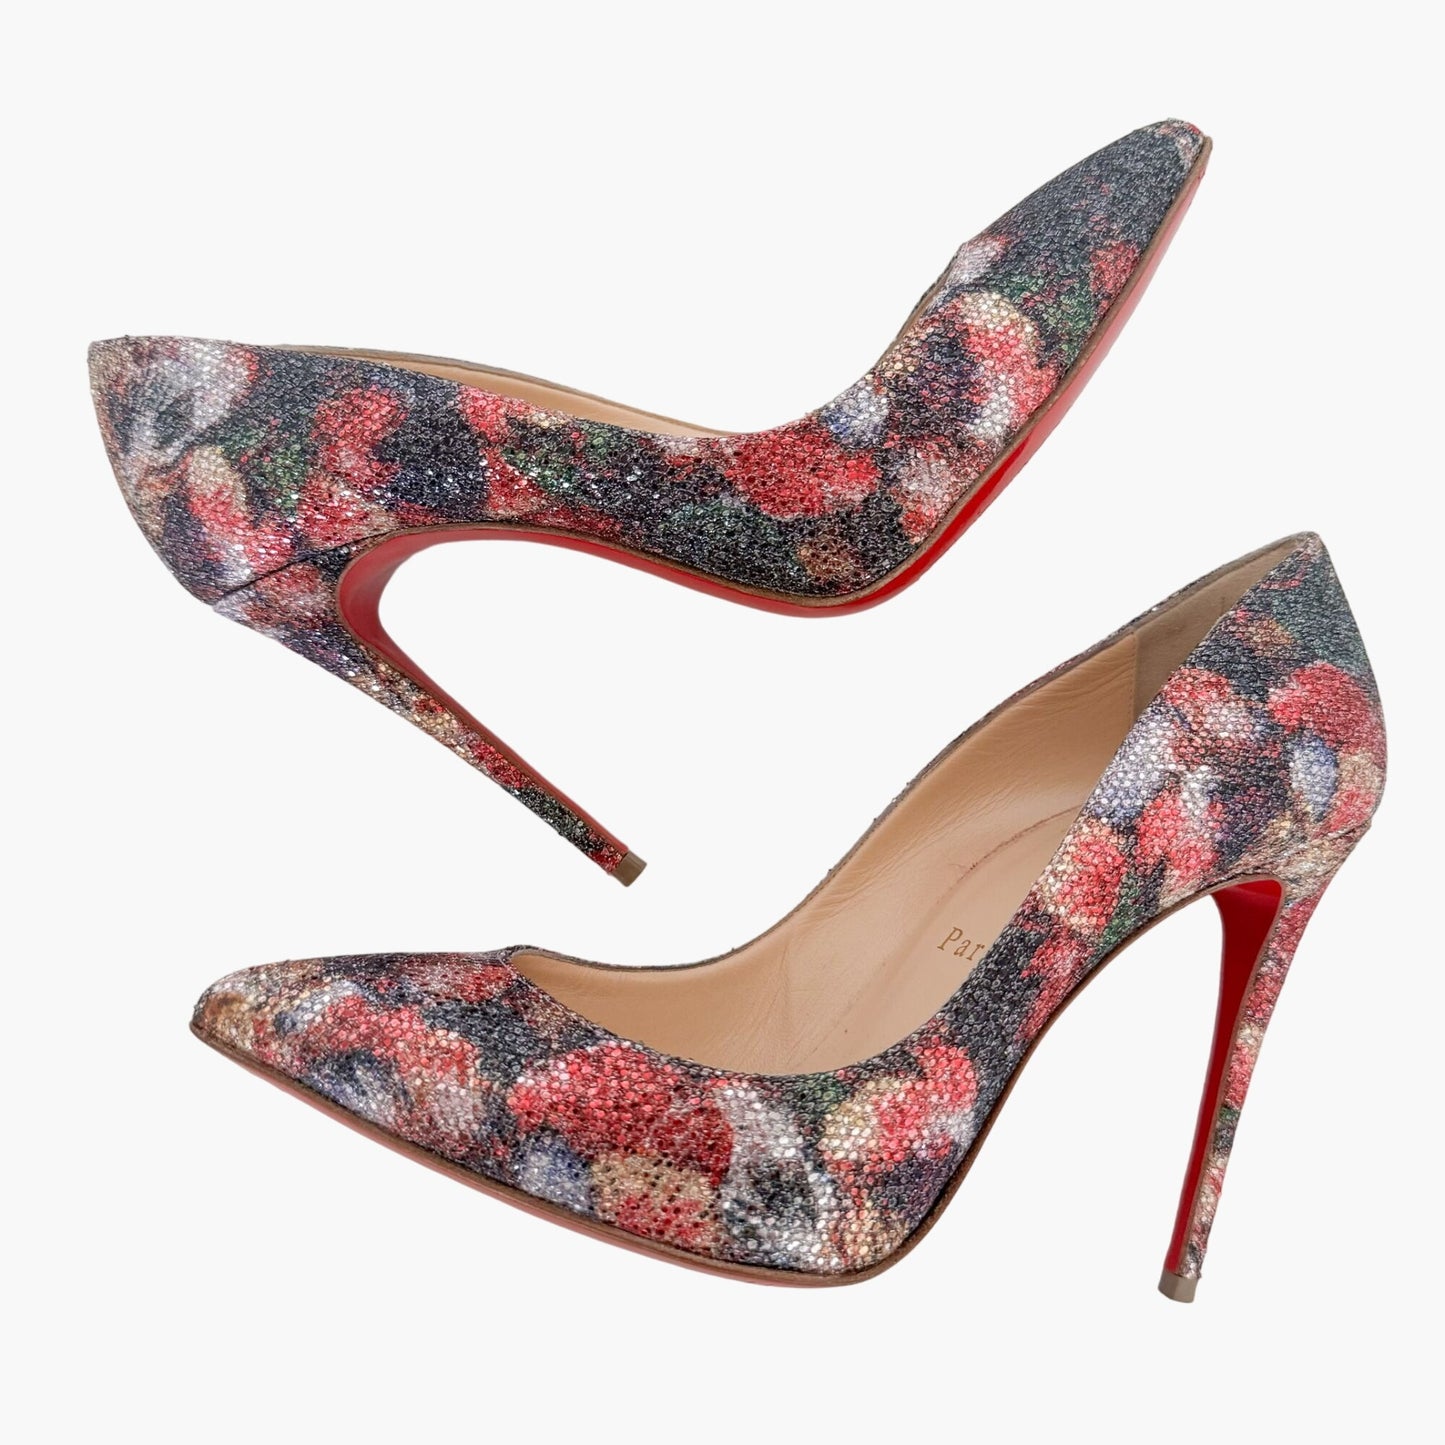 Christian Louboutin Pigalle Follies 100 Pumps in Multi Glitter Plume Size 37.5